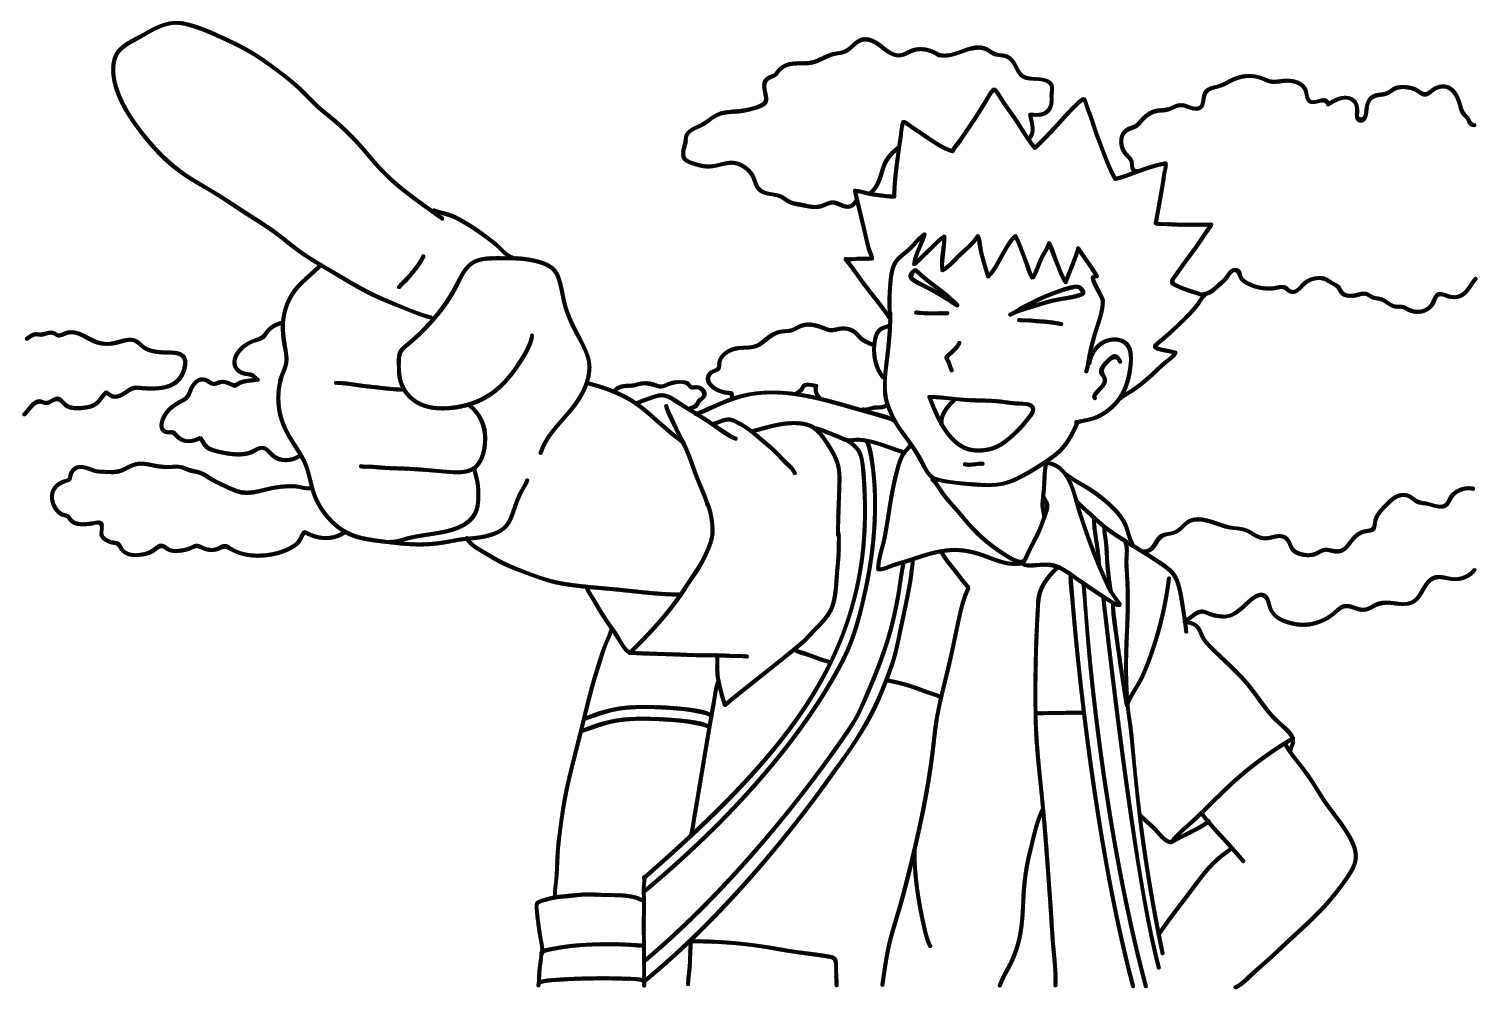 Brock Coloring Pages to Download from Brock